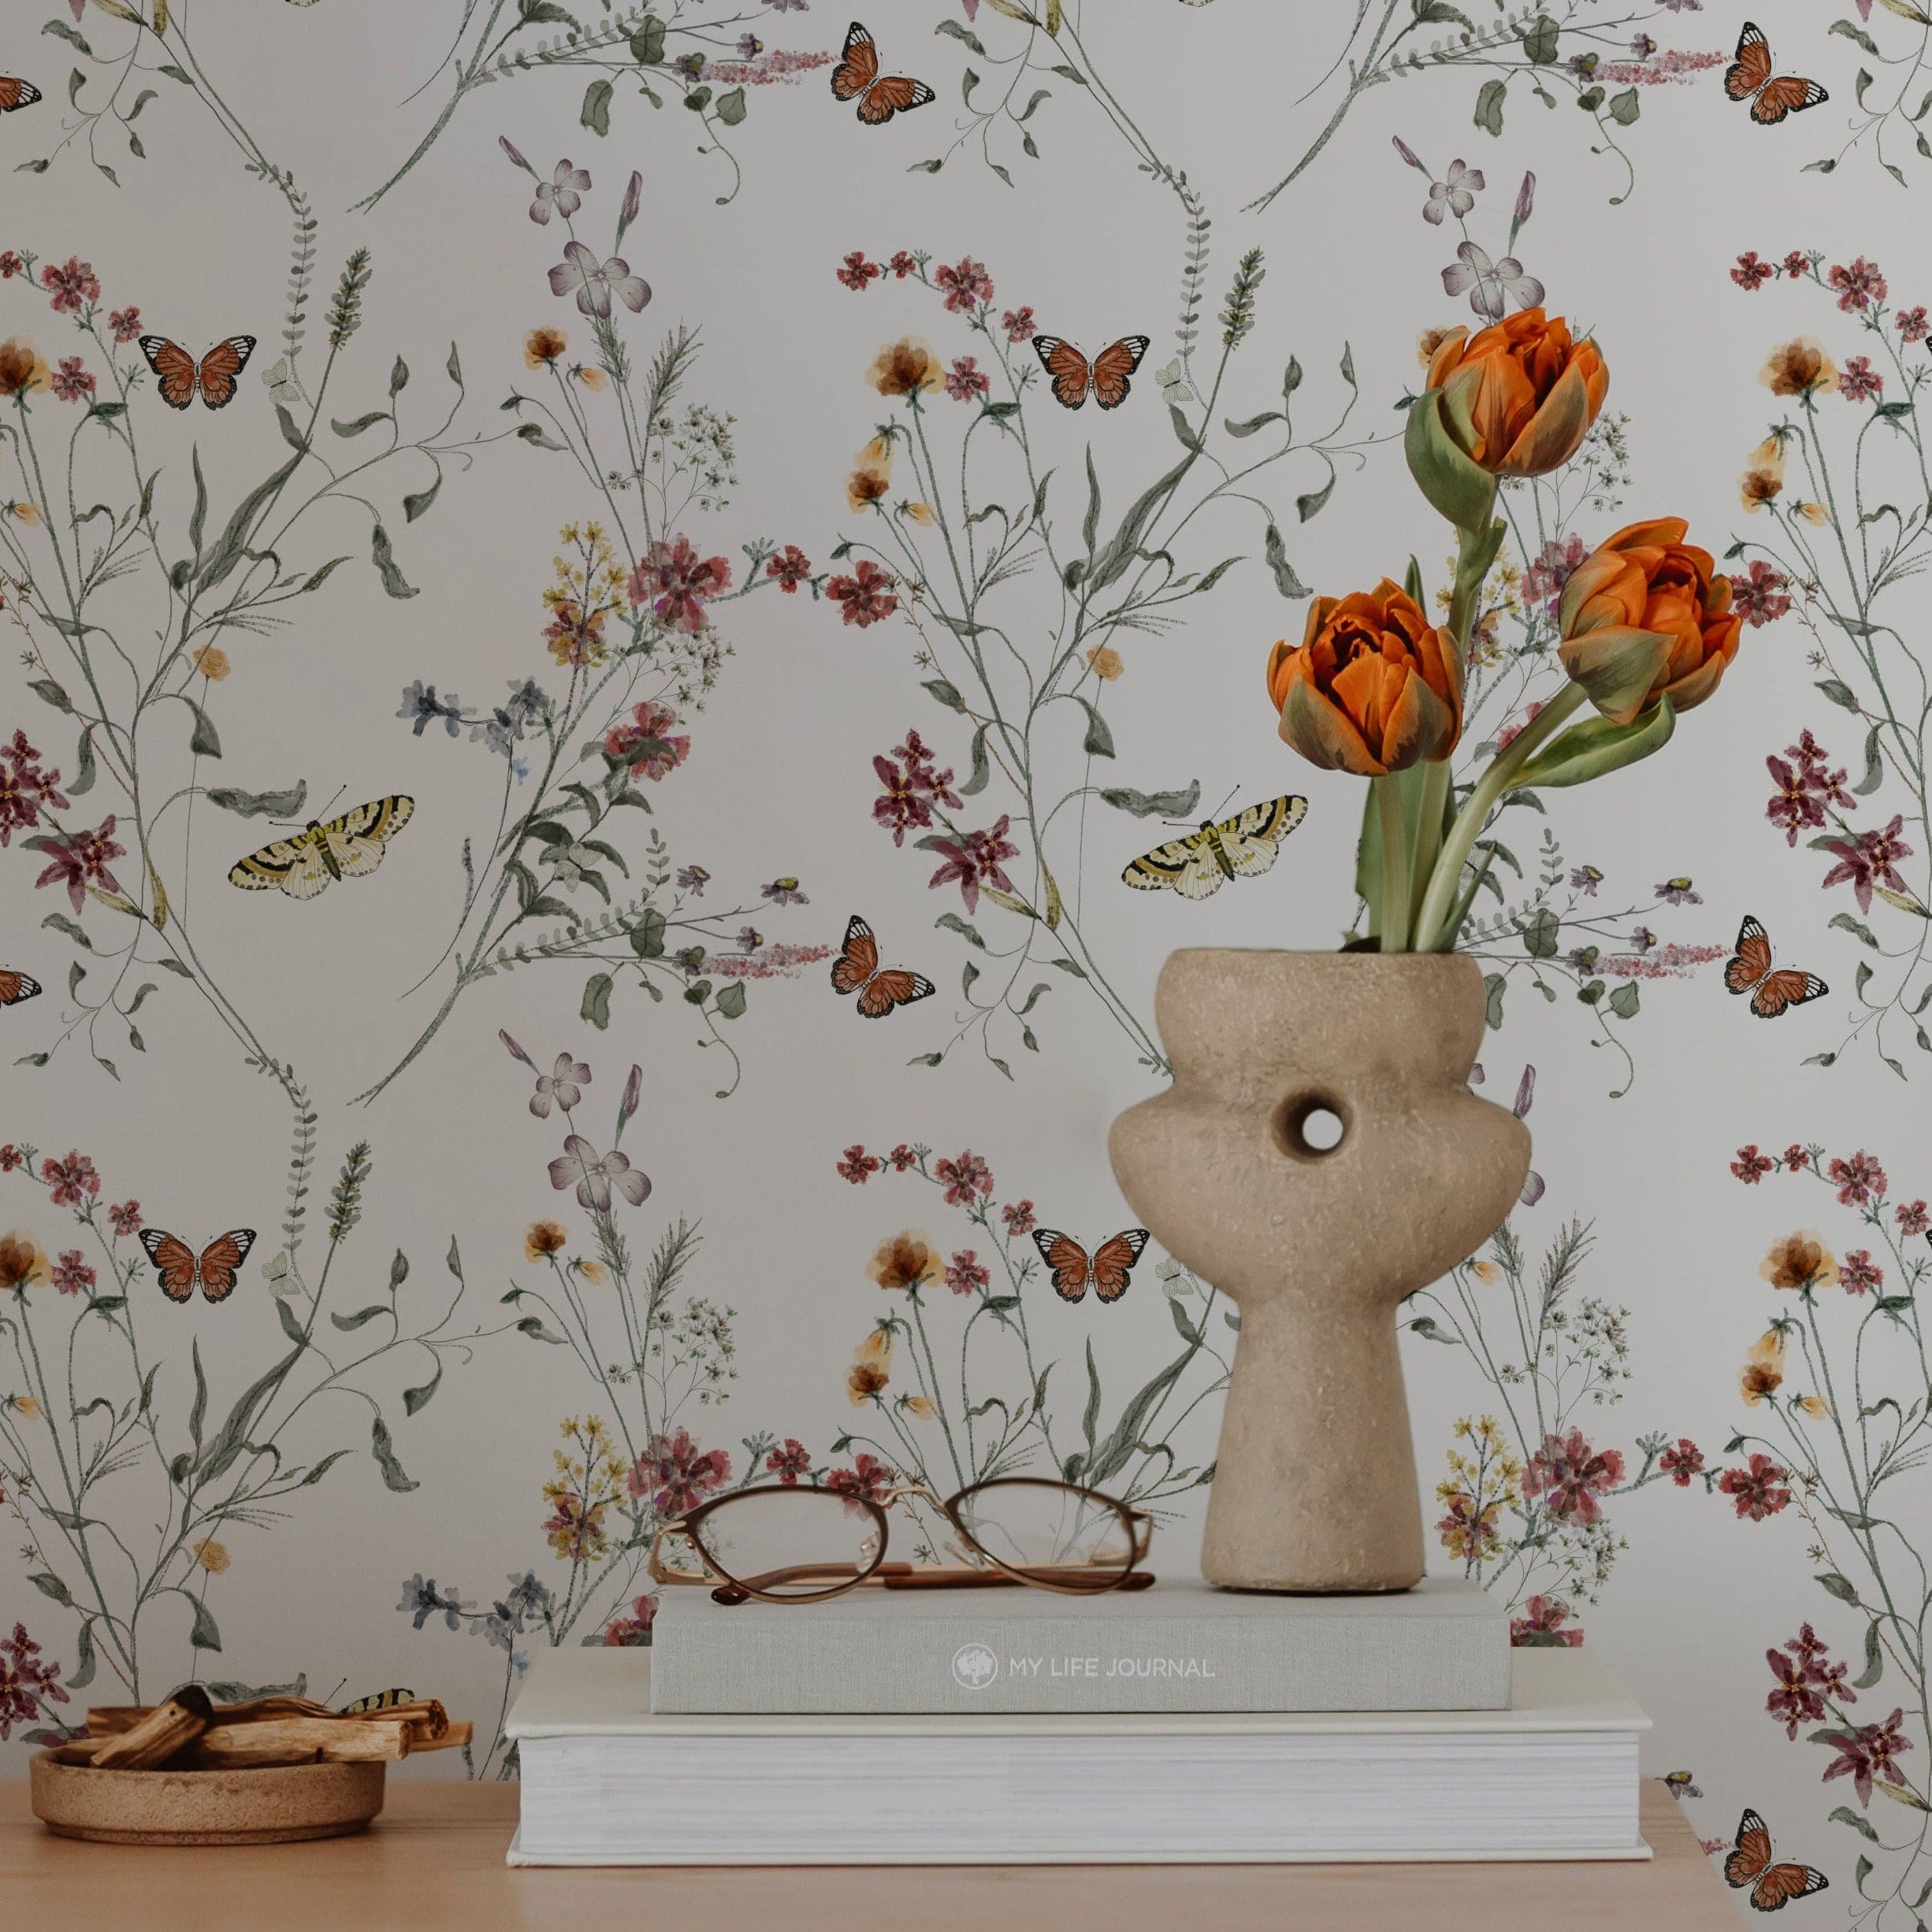 Stylish workspace with Butterfly Botanicals wallpaper. A ceramic vase with orange tulips, glasses, and books on a white table complement the floral theme